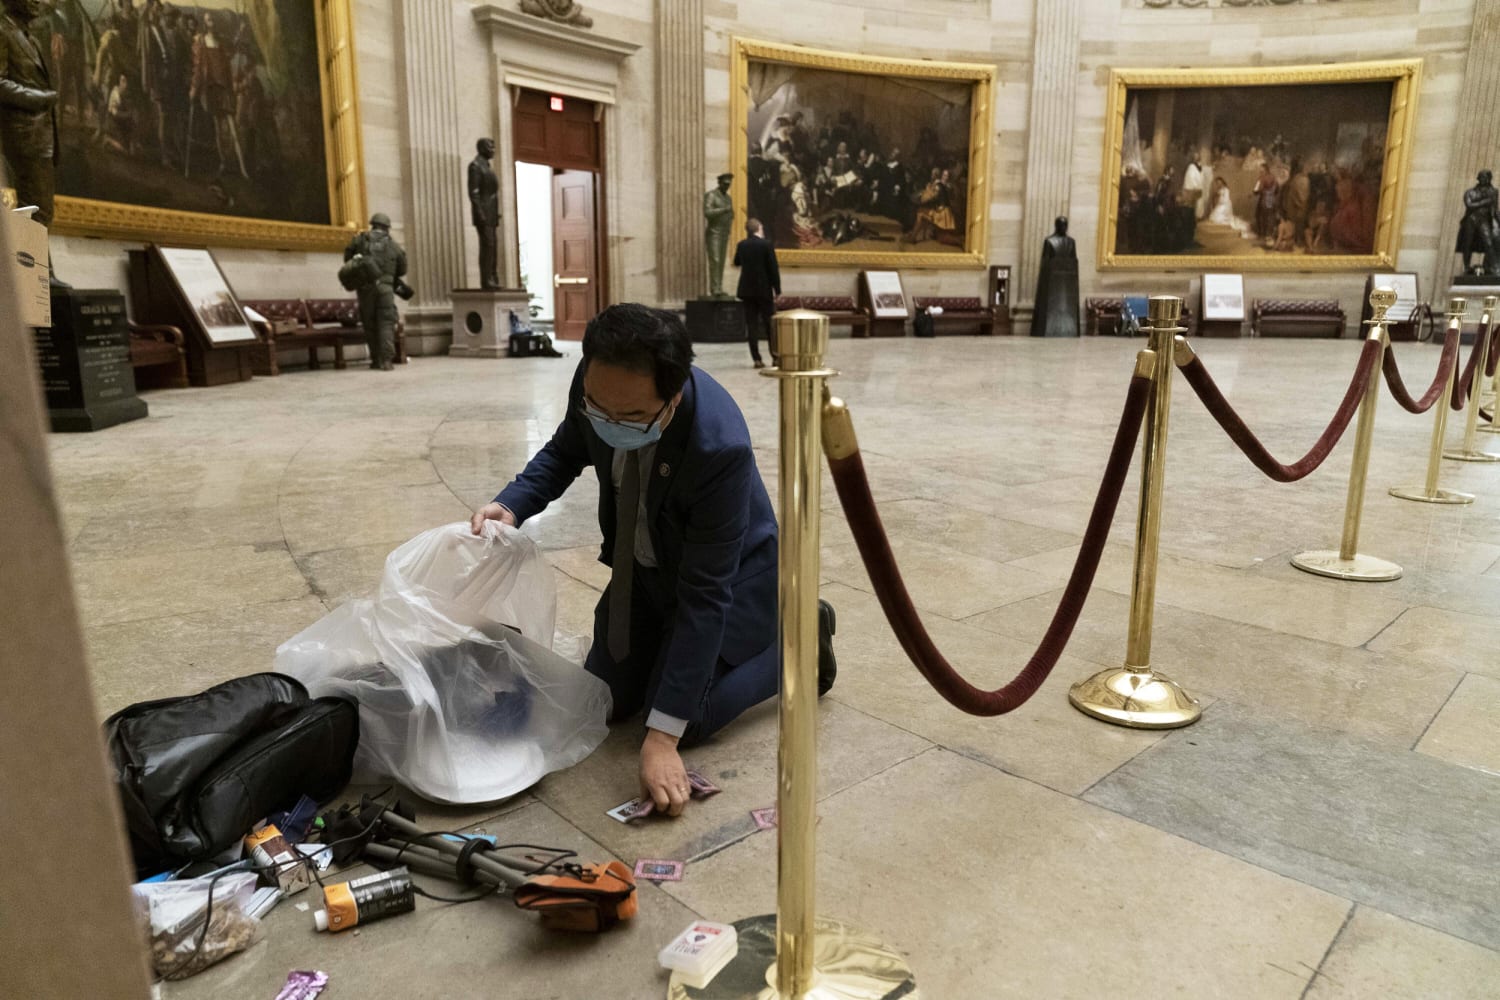 A year after viral photo, Rep. Andy Kim reflects on being a ‘caretaker of our democracy’